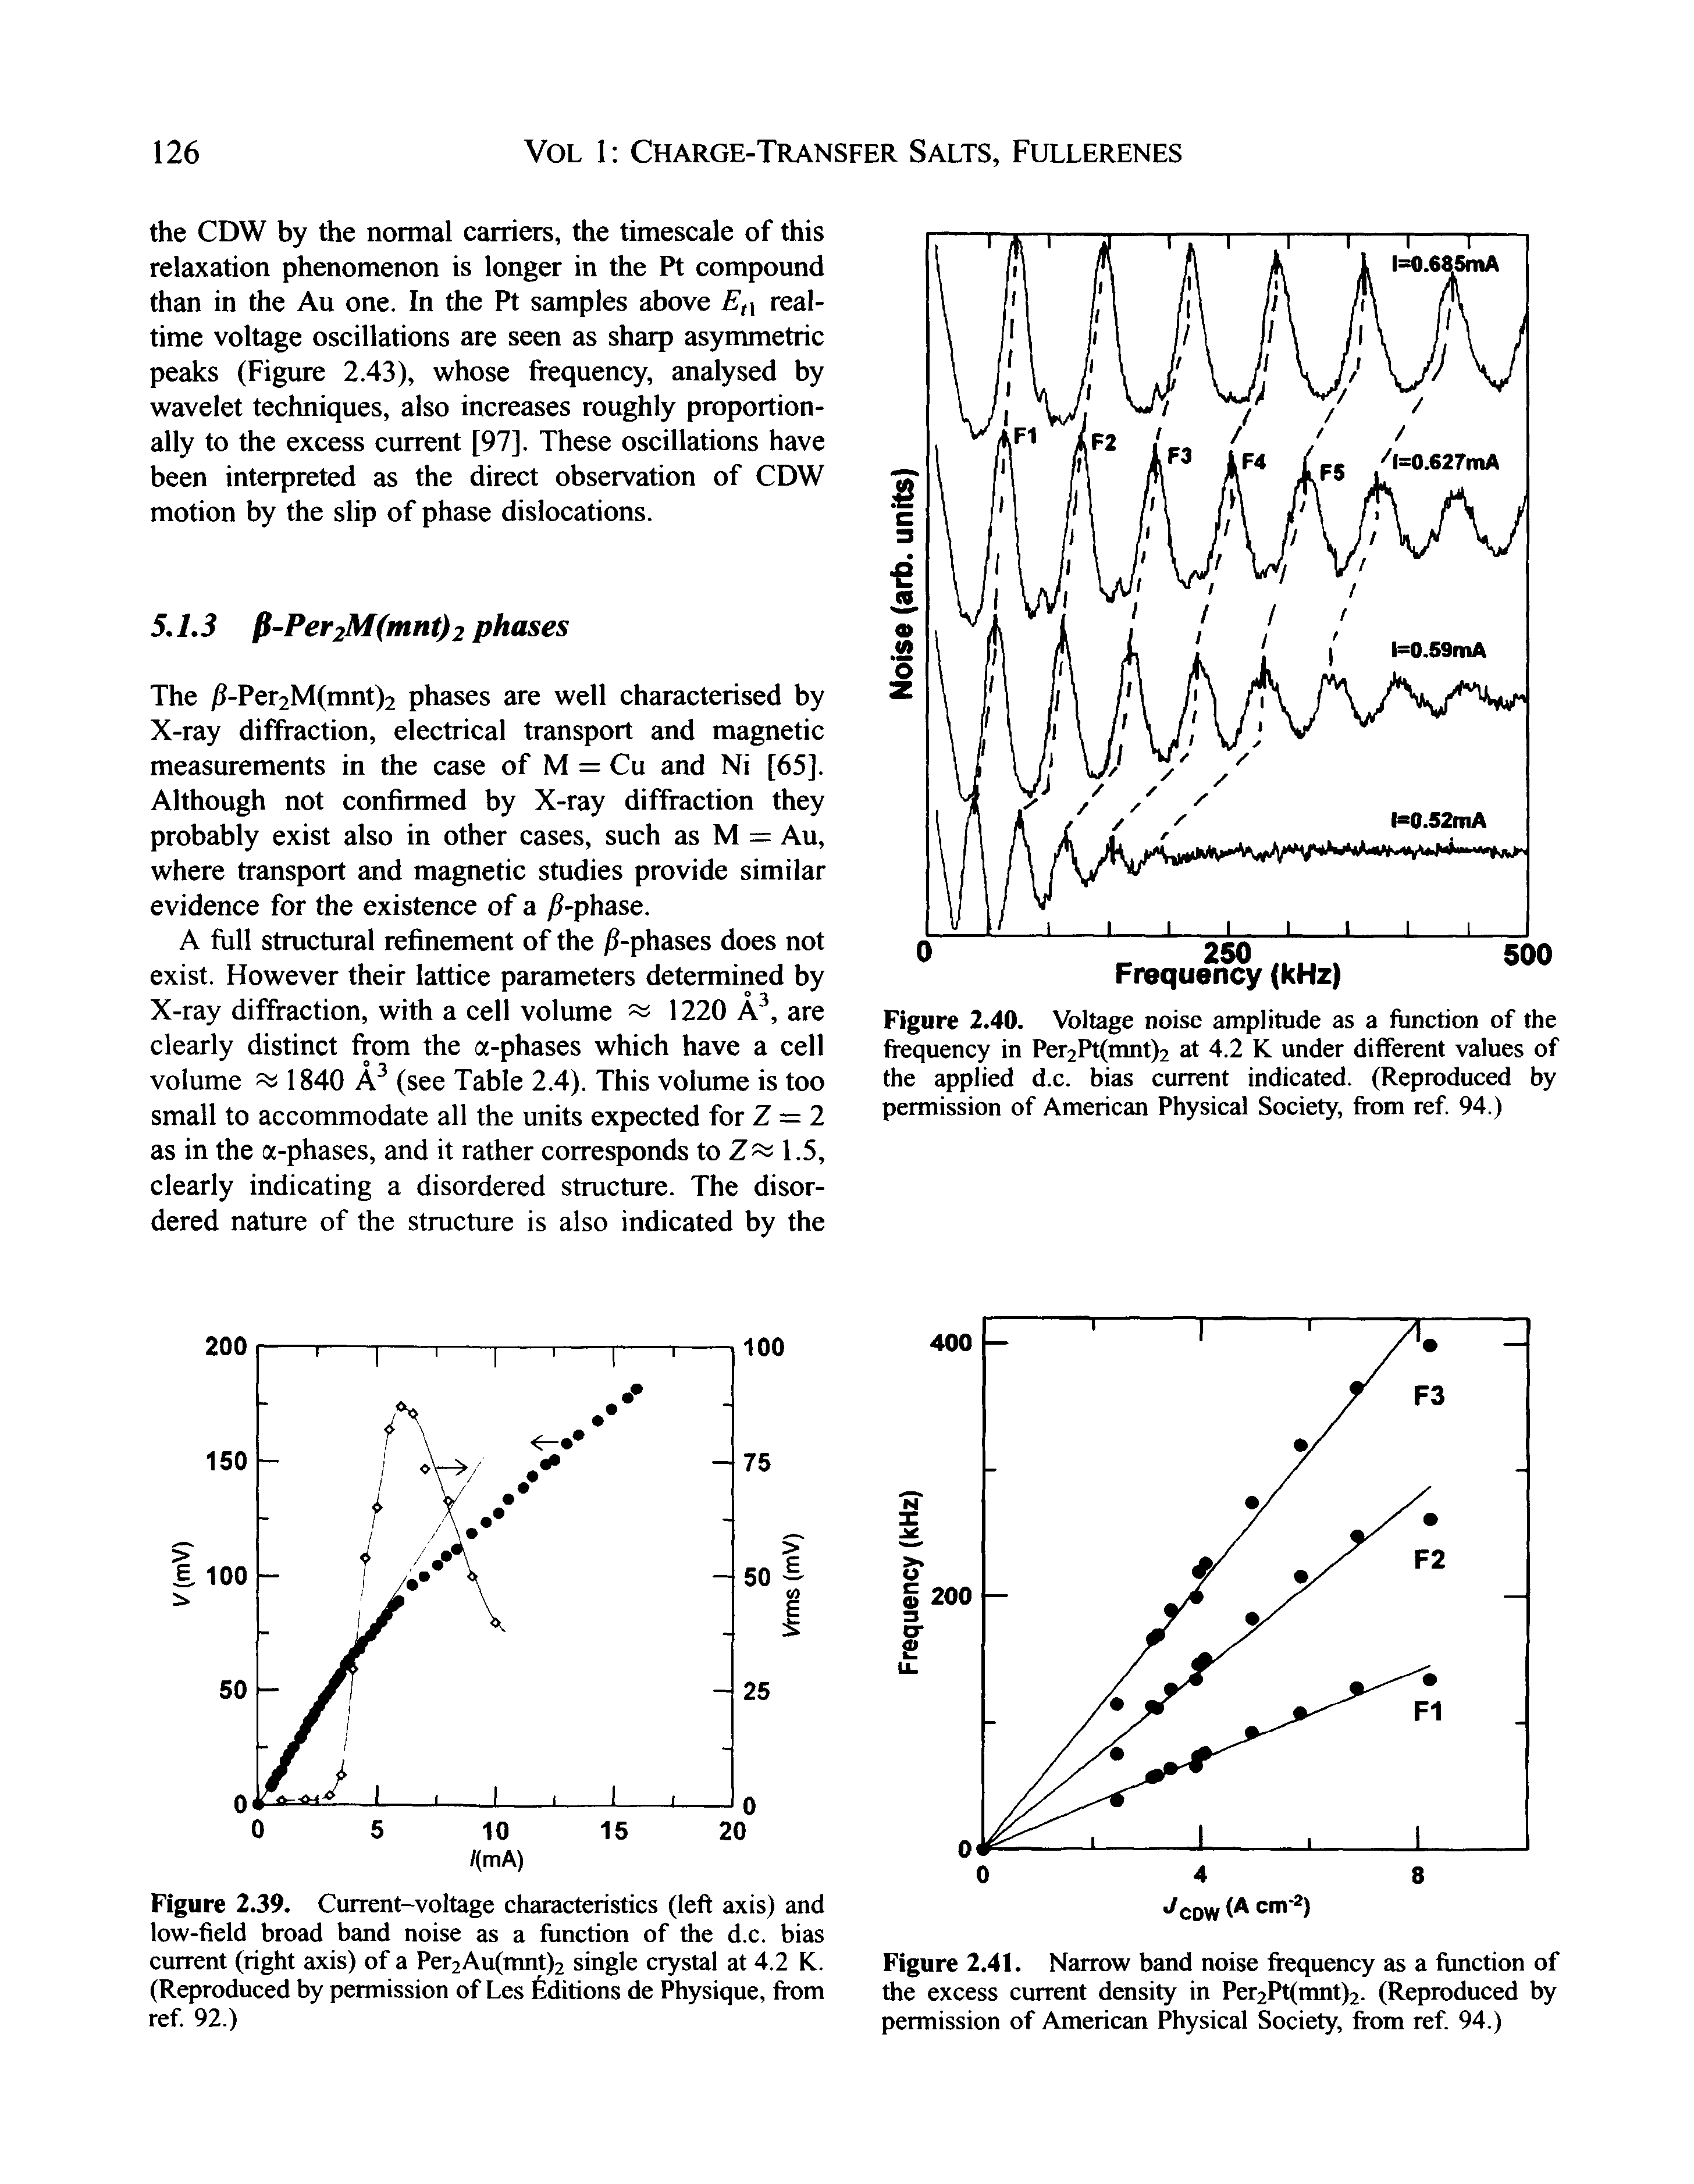 Figure 2.41. Narrow band noise frequency as a function of the excess current density in Per2Pt(mnt)2. (Reproduced by permission of American Physical Society, from ref. 94.)...